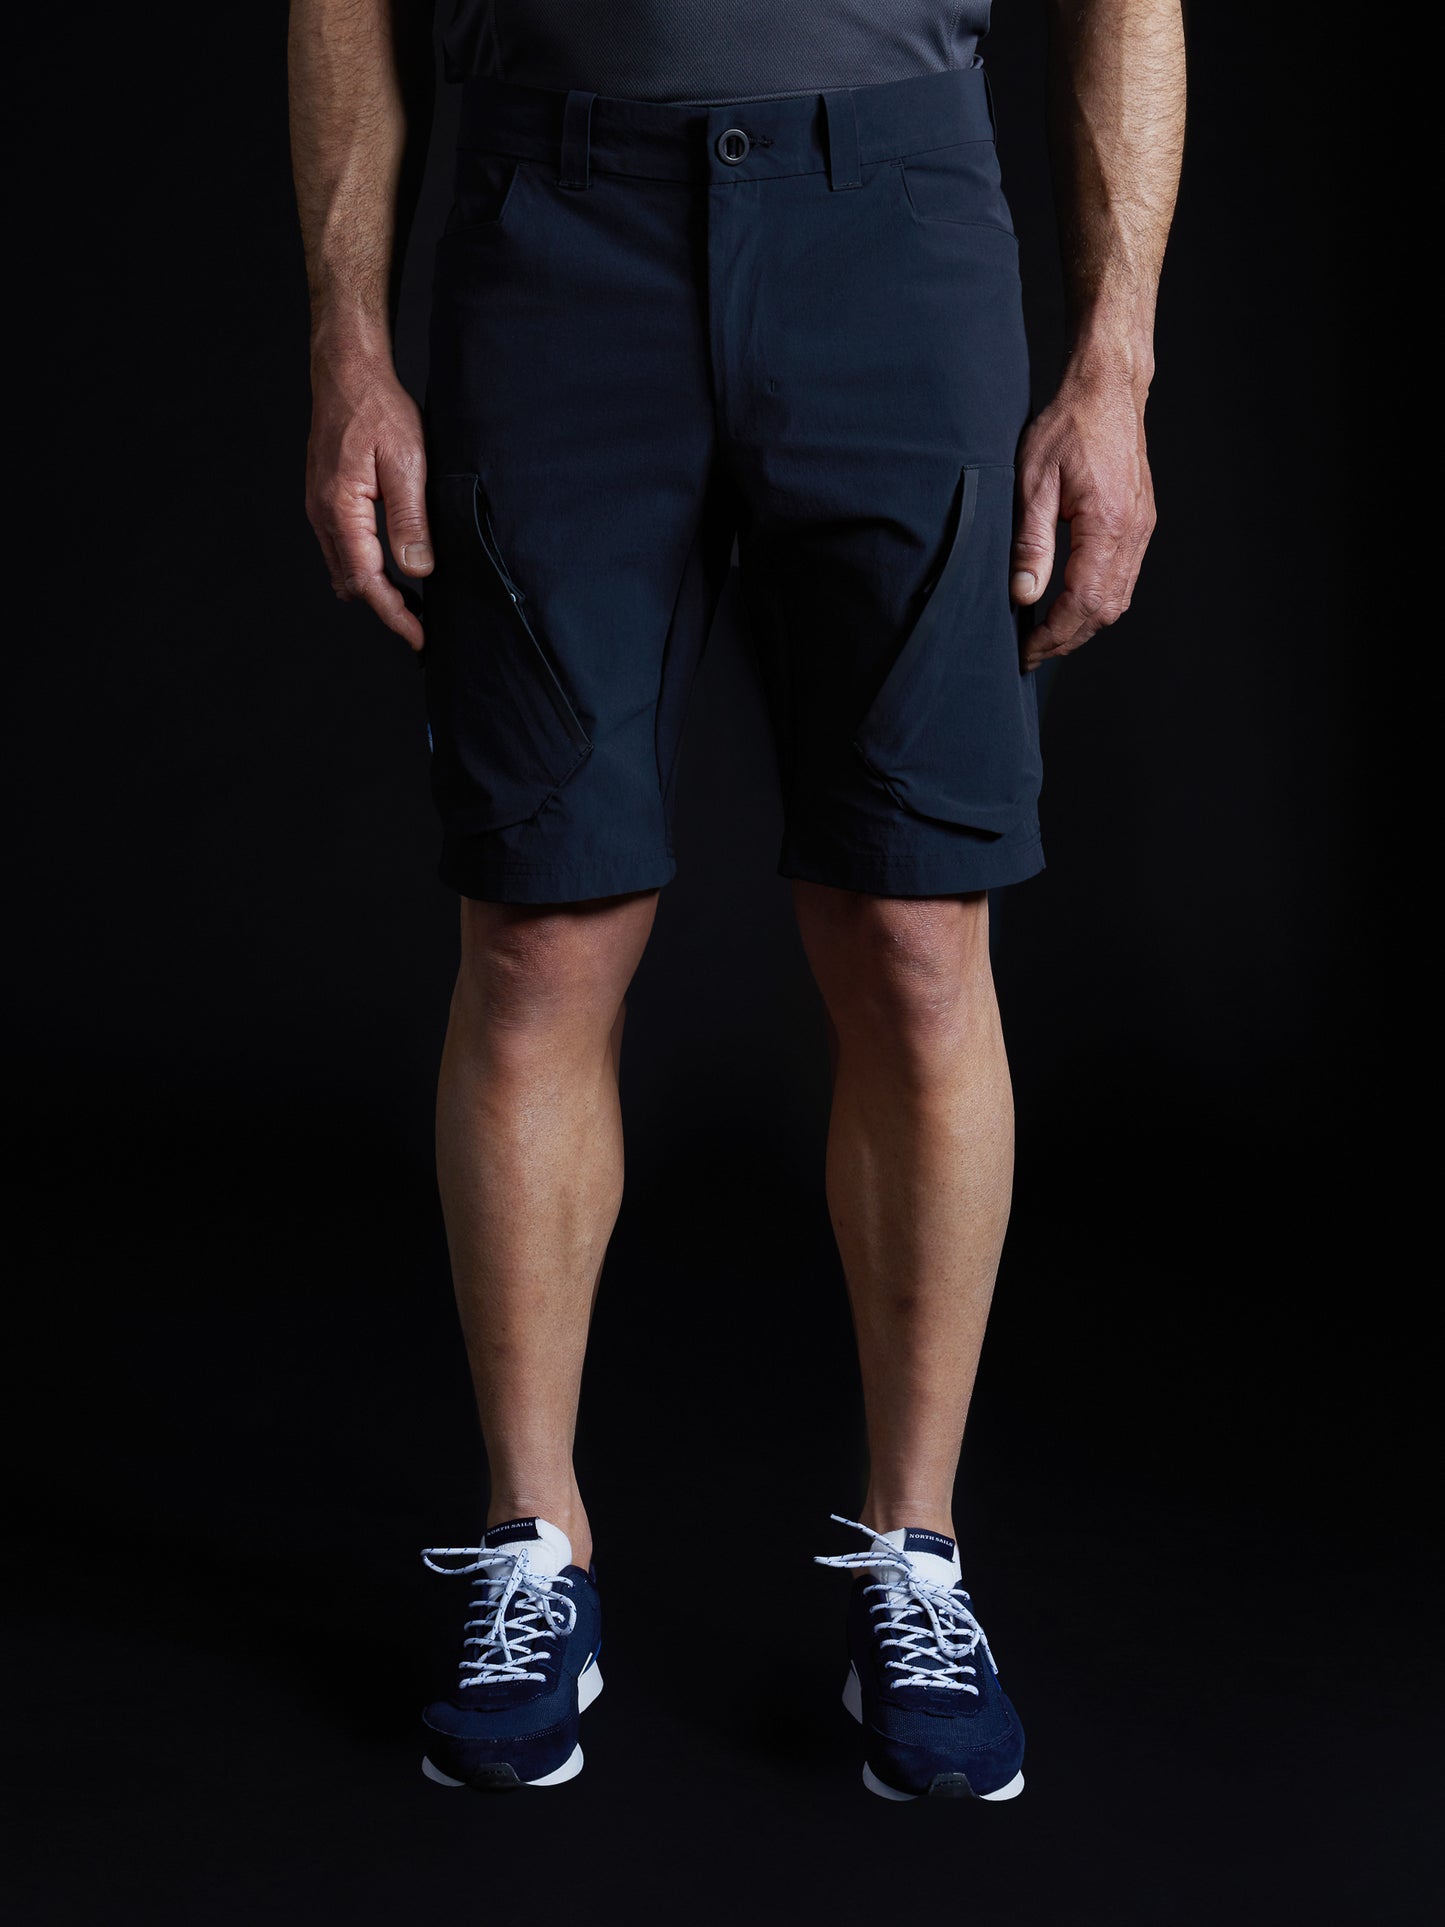 North Sails Trimmers Fast Dry Shorts - Navy